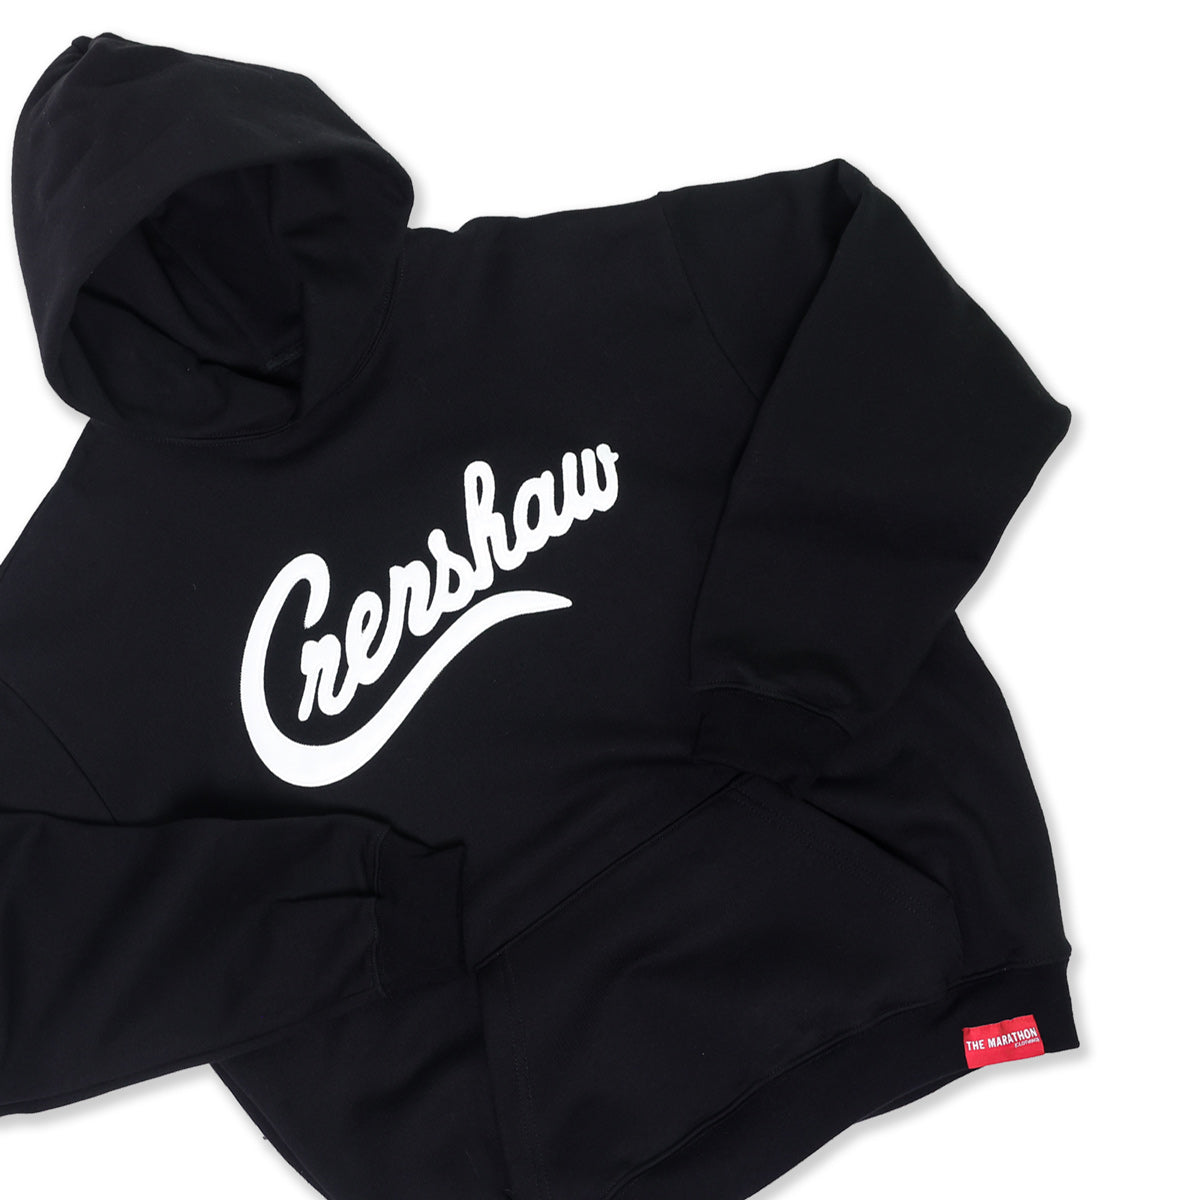 Limited Edition Ultra Crenshaw Hoodie - Black/White - Detail 1